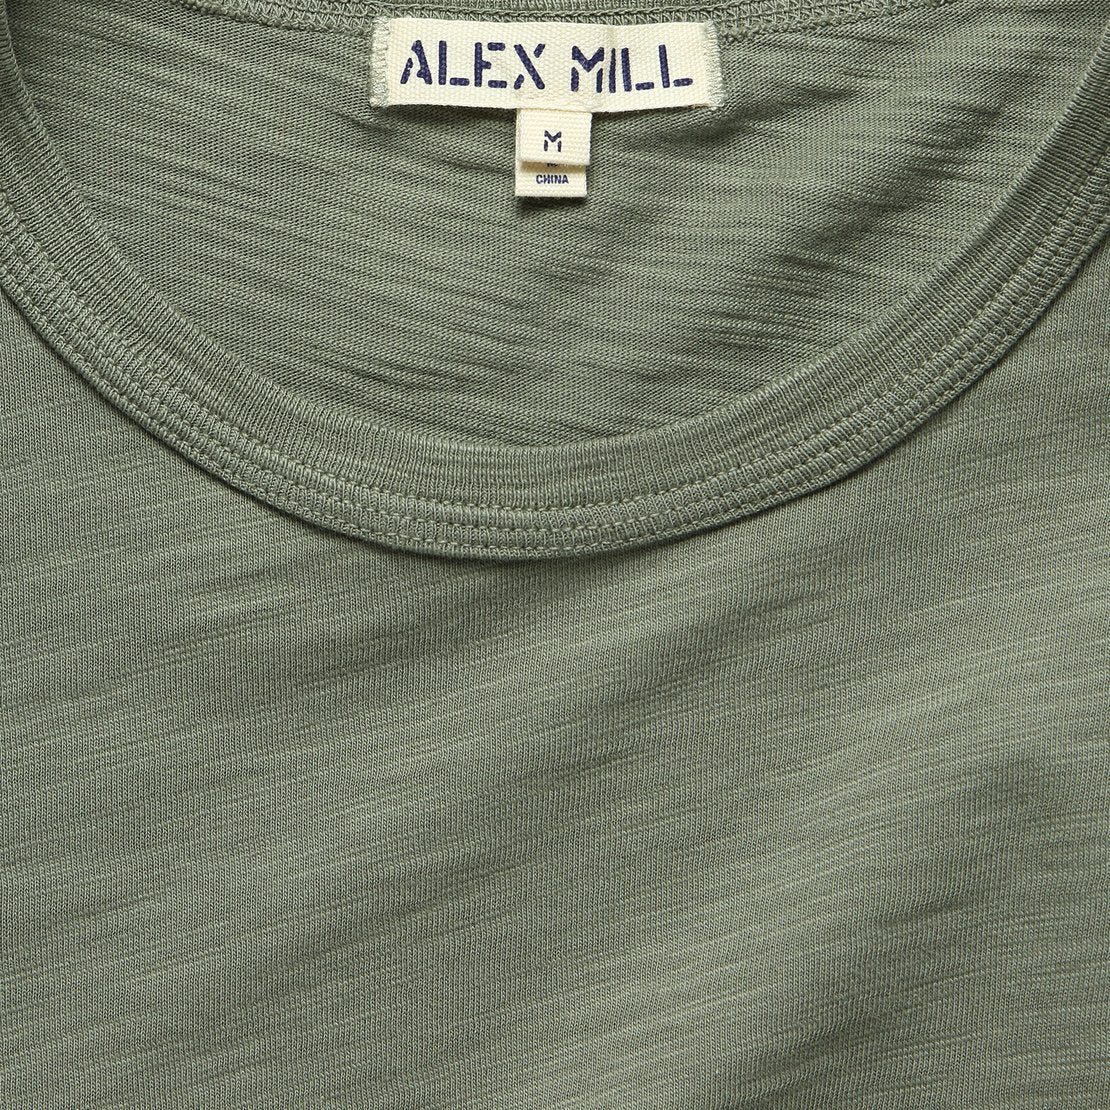 Standard Crew Tee - New Olive - Alex Mill - STAG Provisions - Tops - S/S Tee